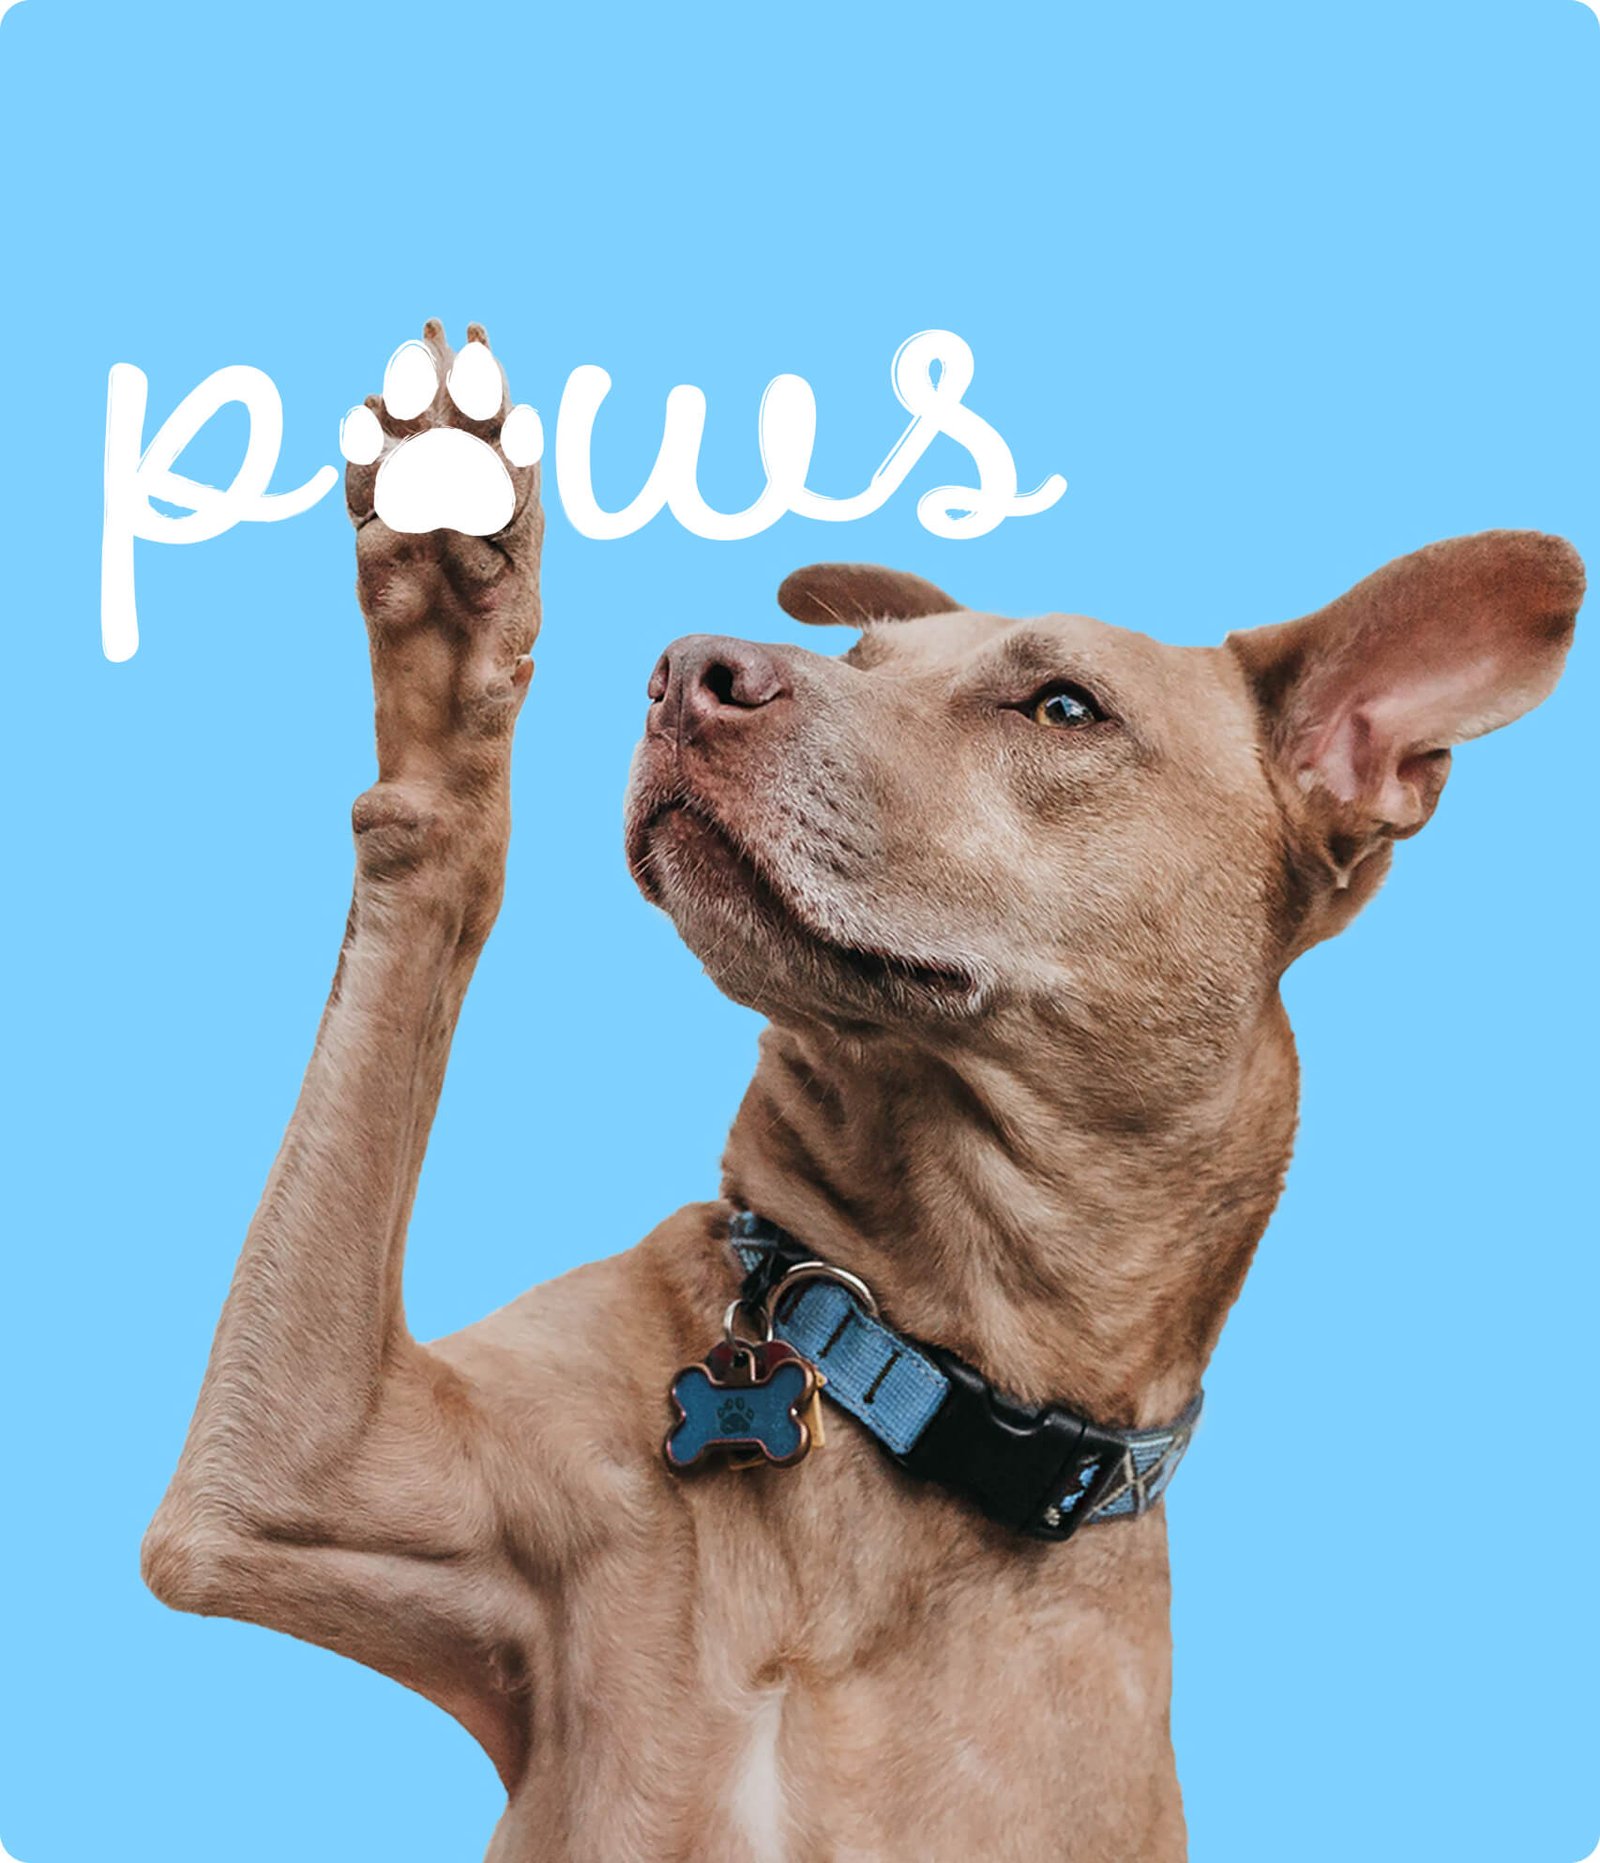 Paws Petsitting is a pet-friendly brand provide expert care for pets and reassure owners that they’re leaving their pets in trusted hands